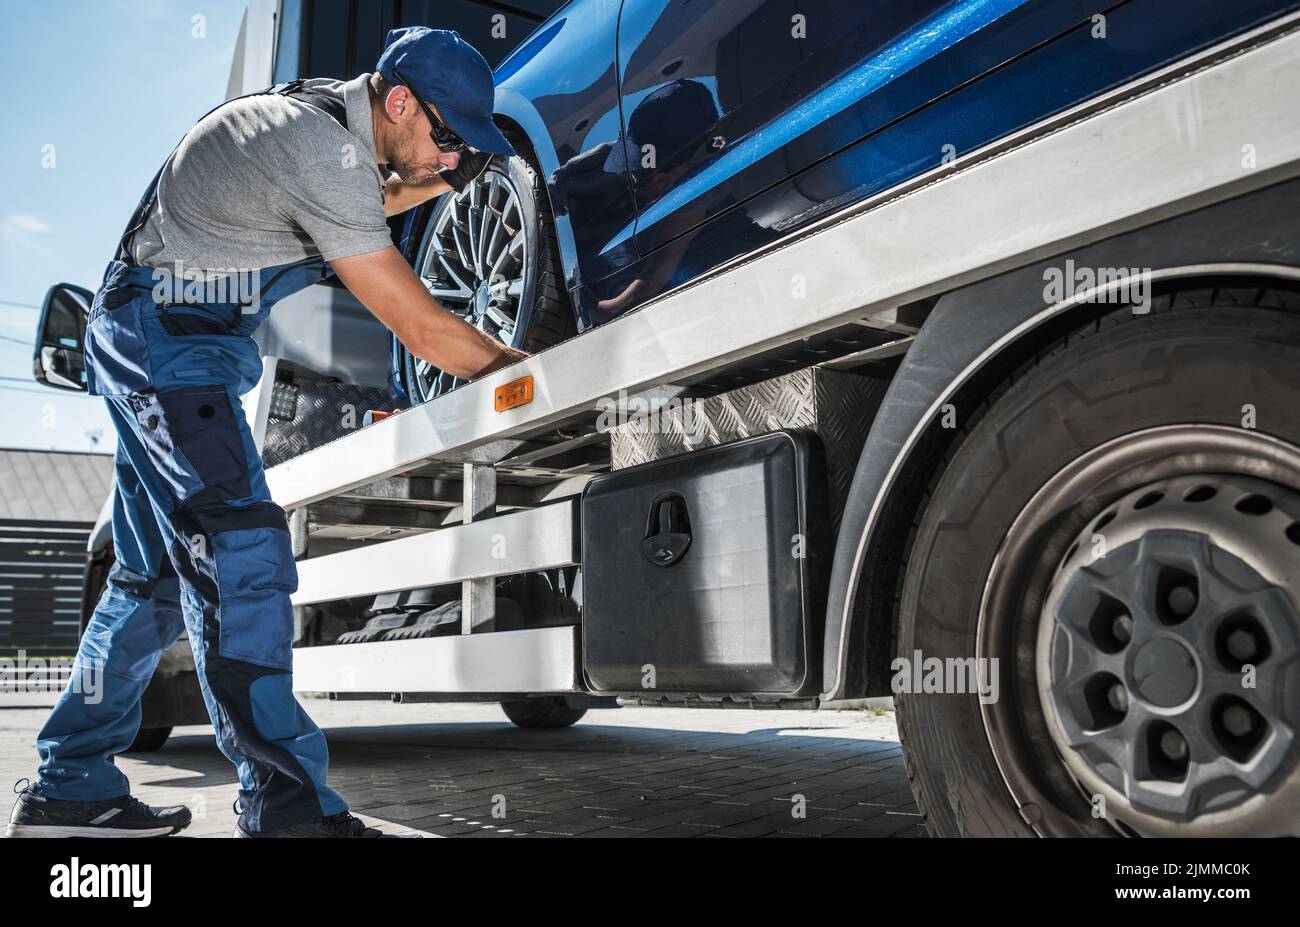 Towing Worker Delivering Brand New Car from Dealer to Client. Caucasian Man Checking the Fastenings to Ensure Safe Transportation on His Tow Truck. Stock Photo